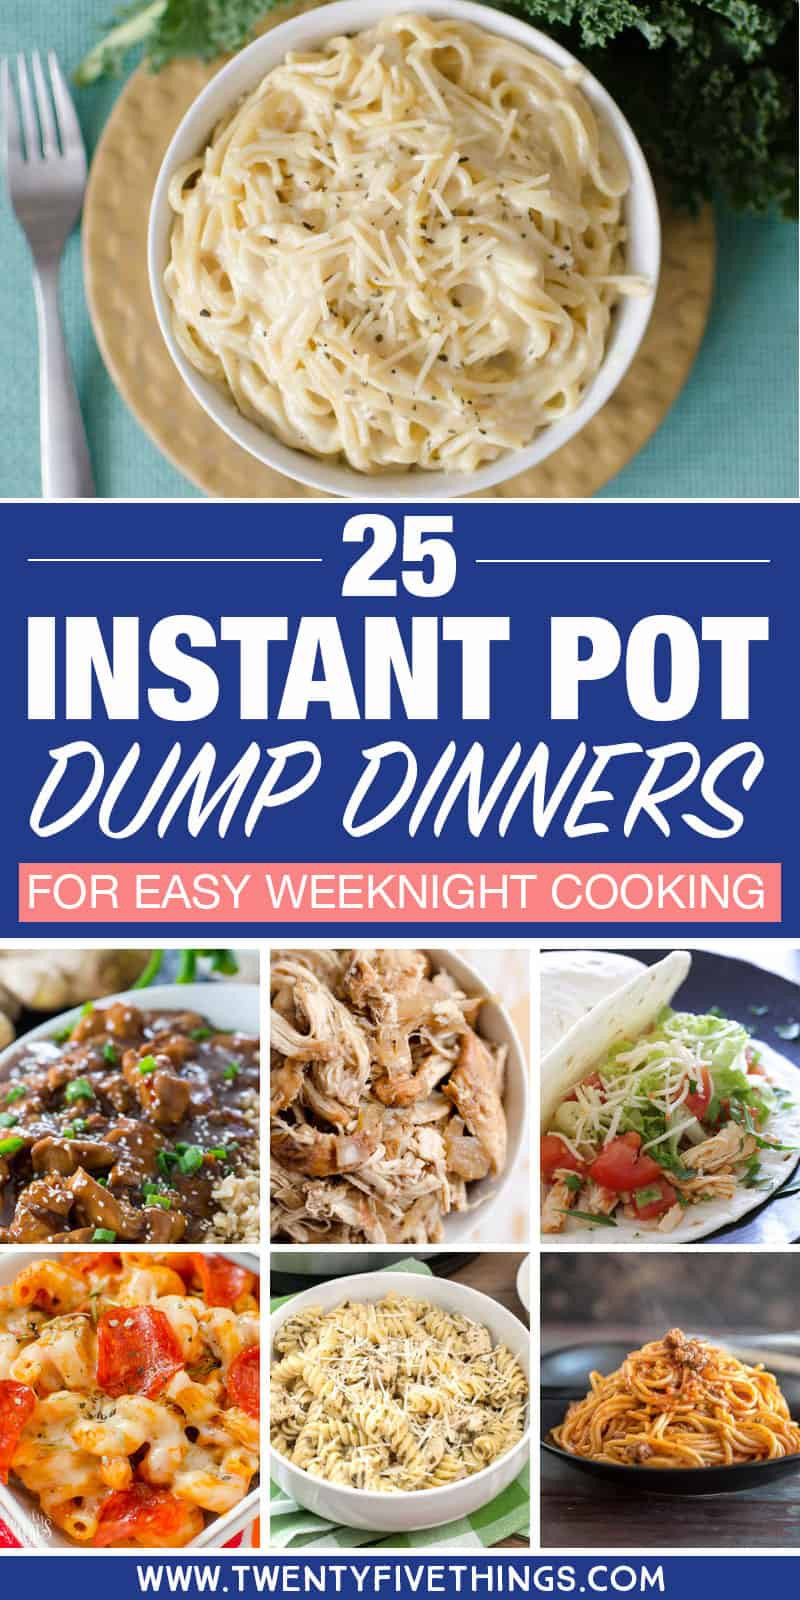 Instant Pot Dinners
 25 Delicious Instant Pot Dump Dinners for Easy Weeknight